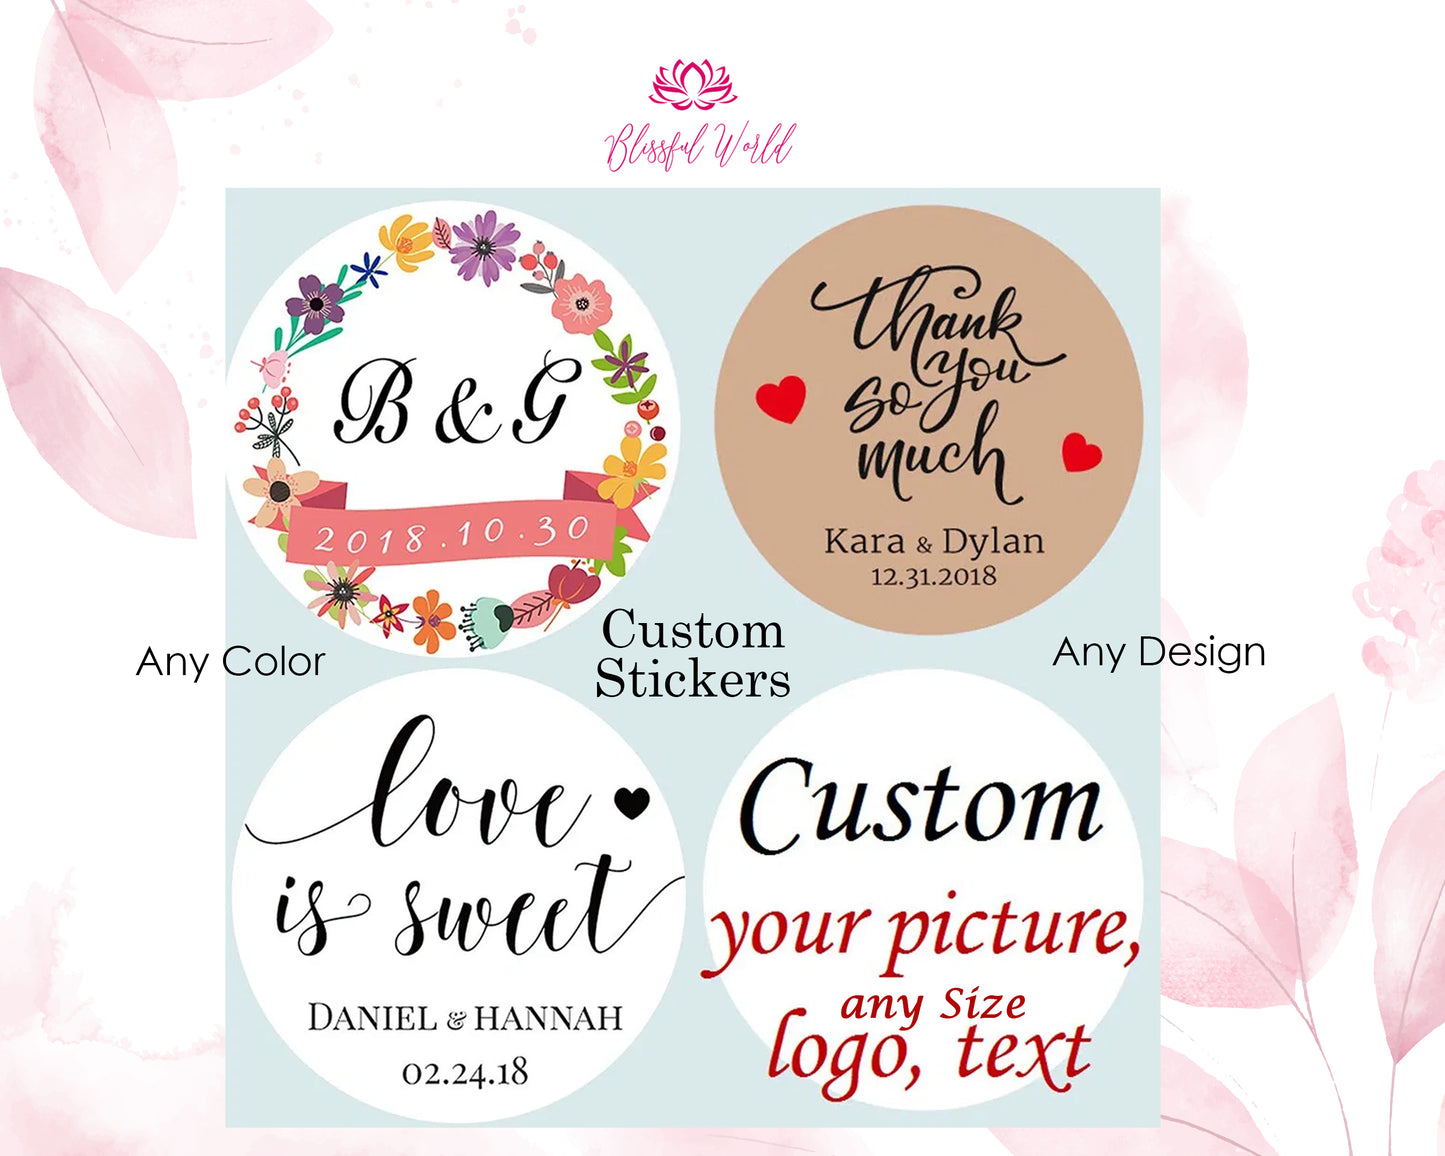 Custom stickers | personalised stickers | logo stickers | Business stickers | labels | Postage labels | Order stickers | Matte or Glossy